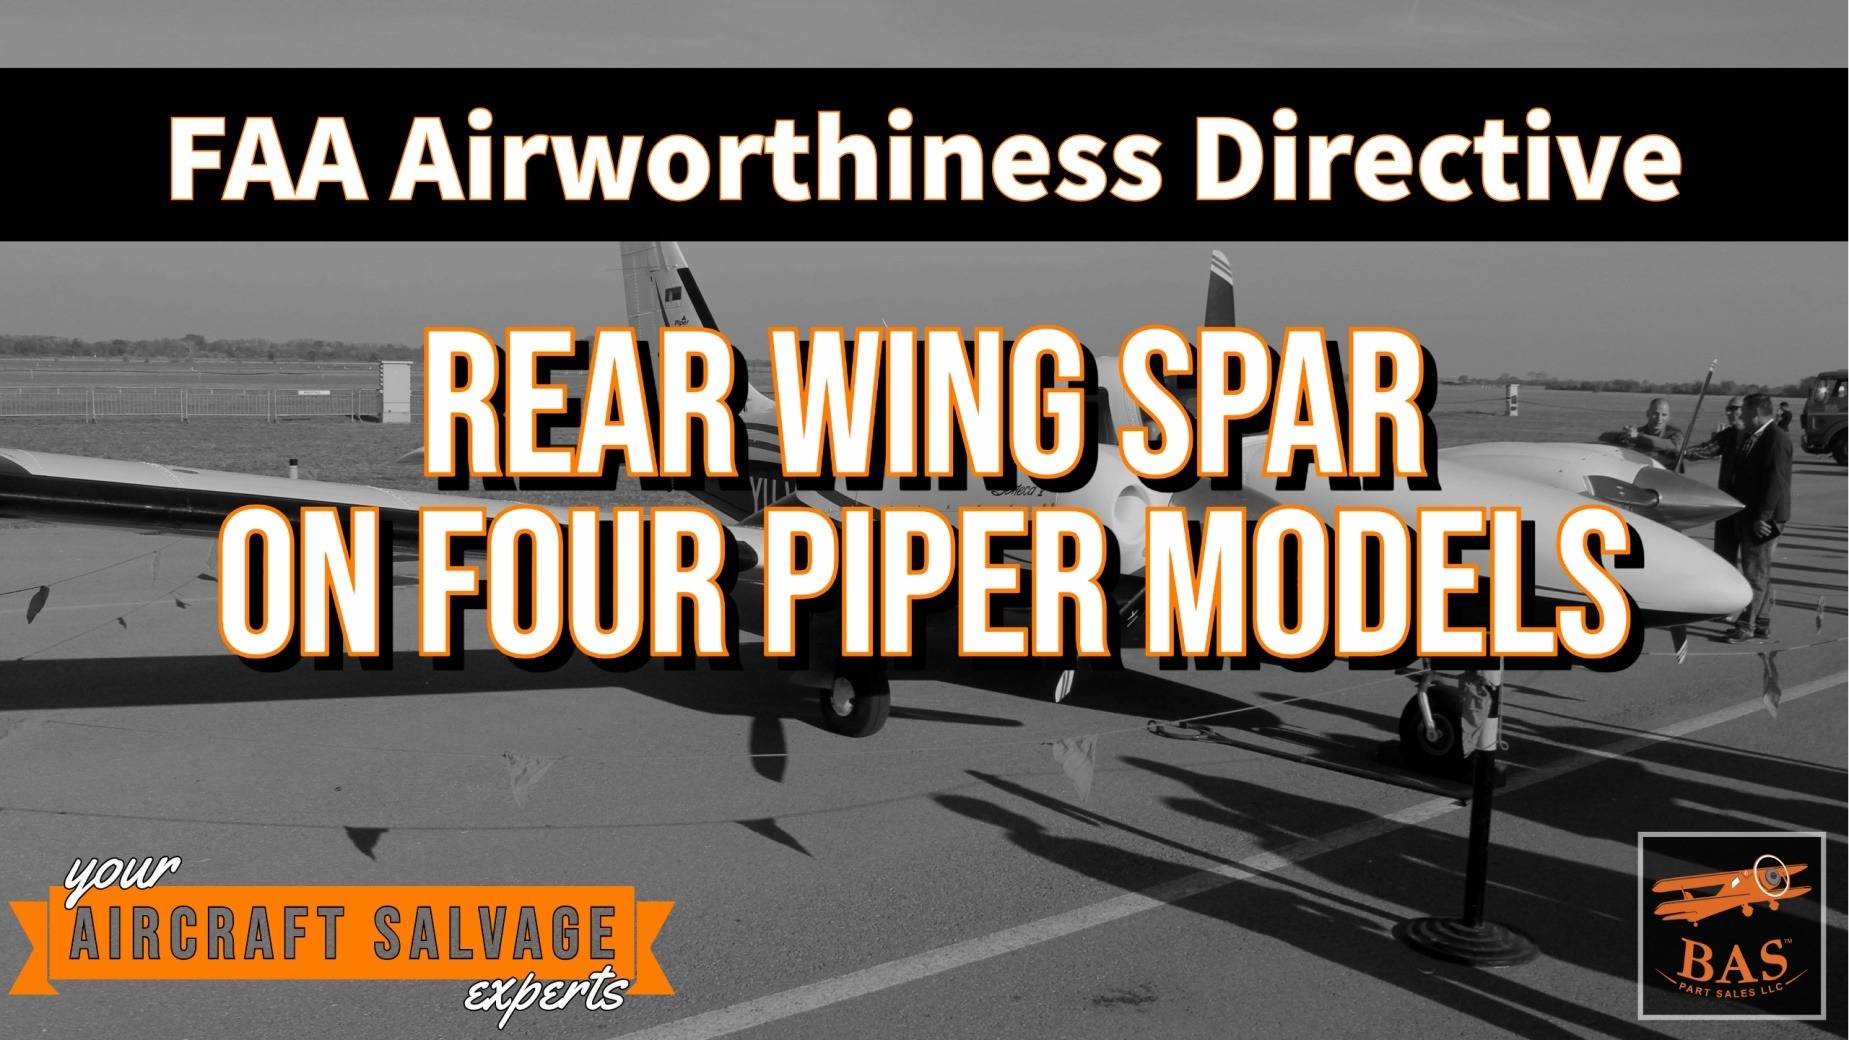 FAA AD for Rear Wing Spar On Four Piper Airplane Models